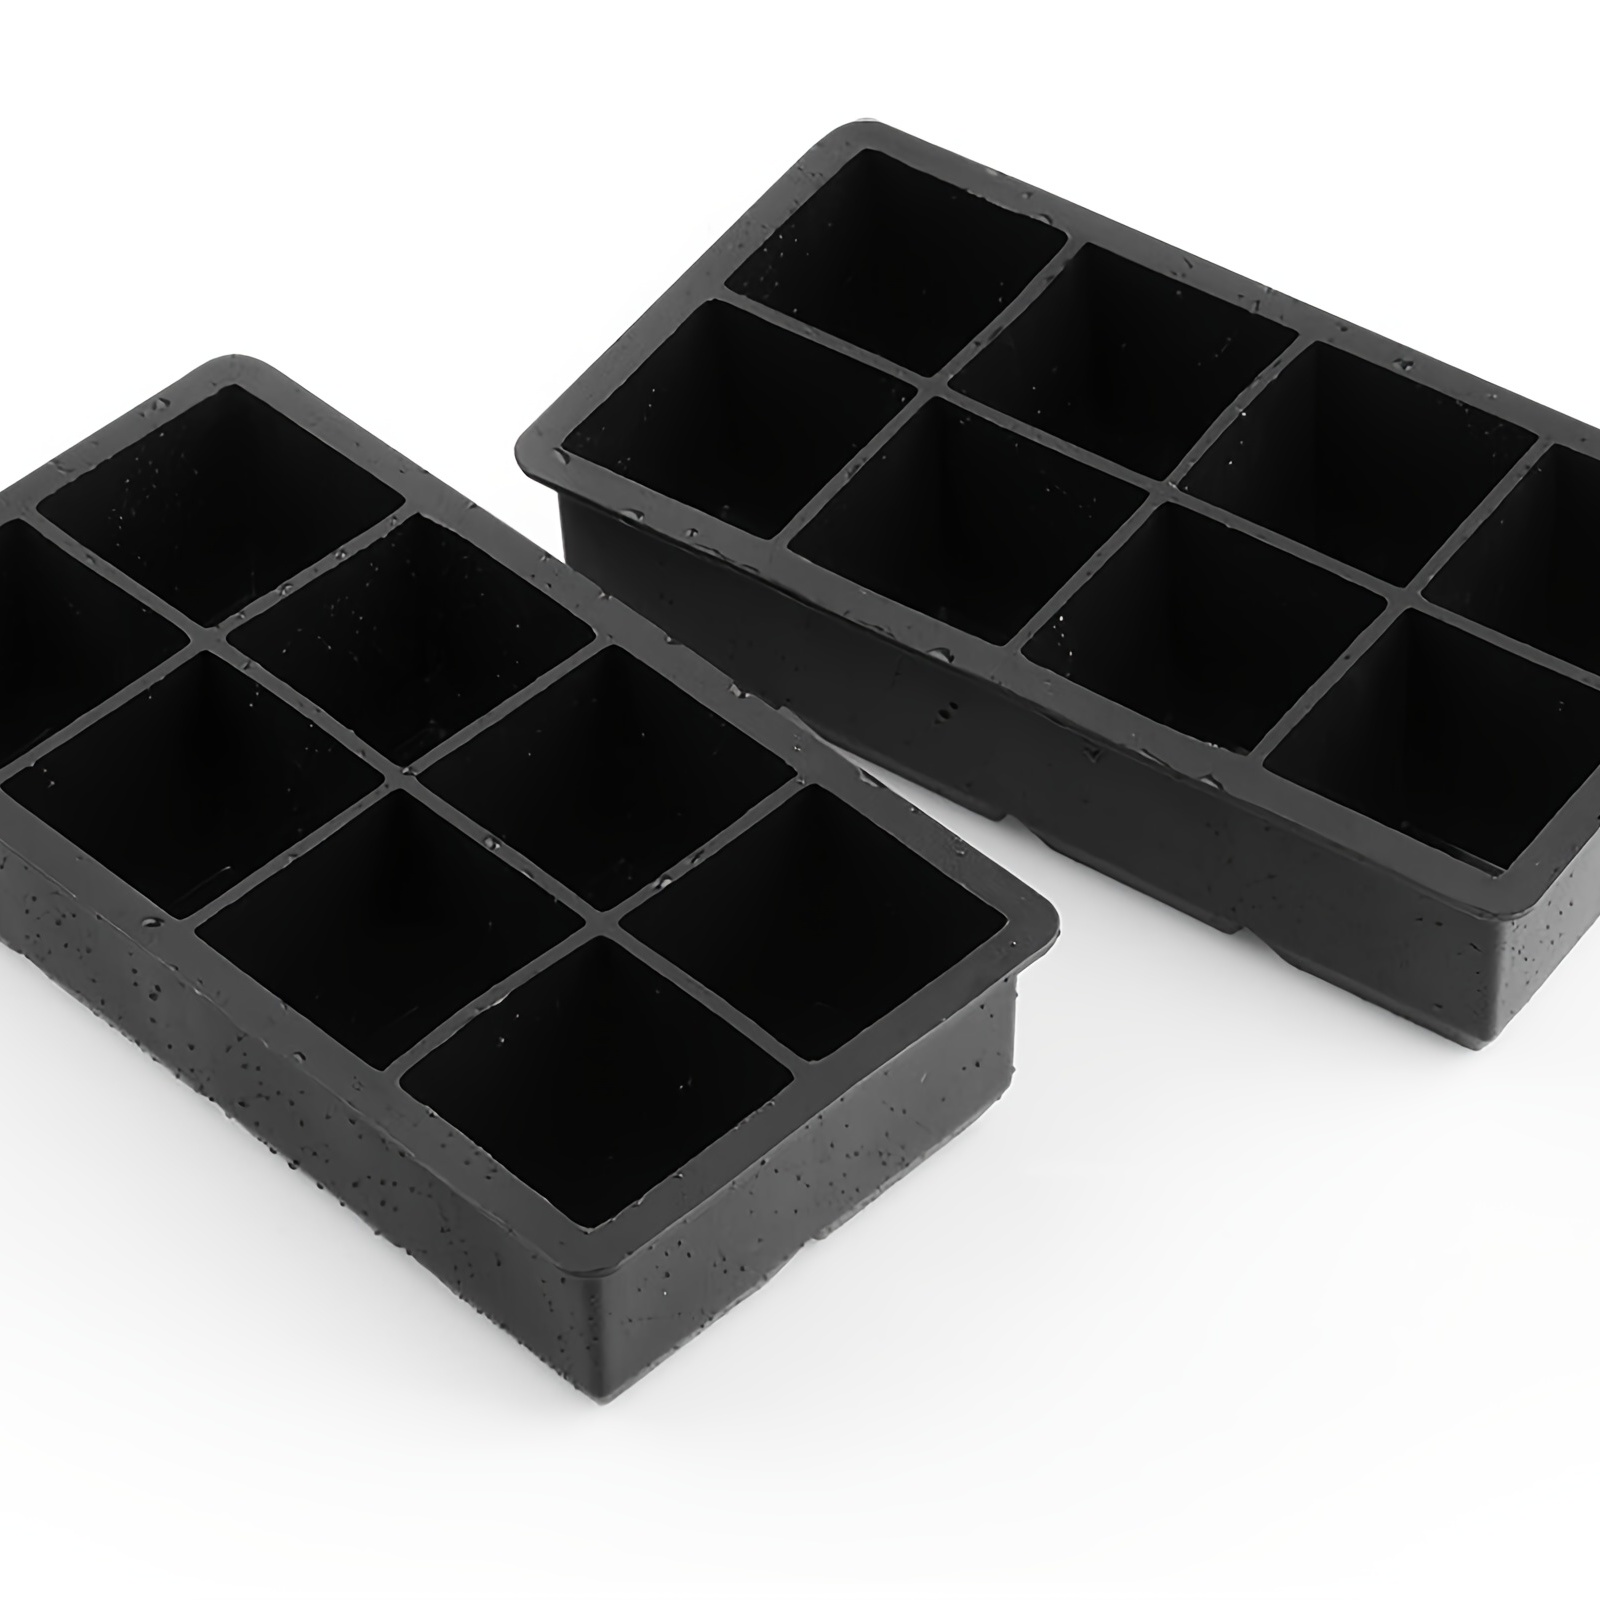 Large Silicone Ice Cube Tray Molds, Big Cubes, Food Grade